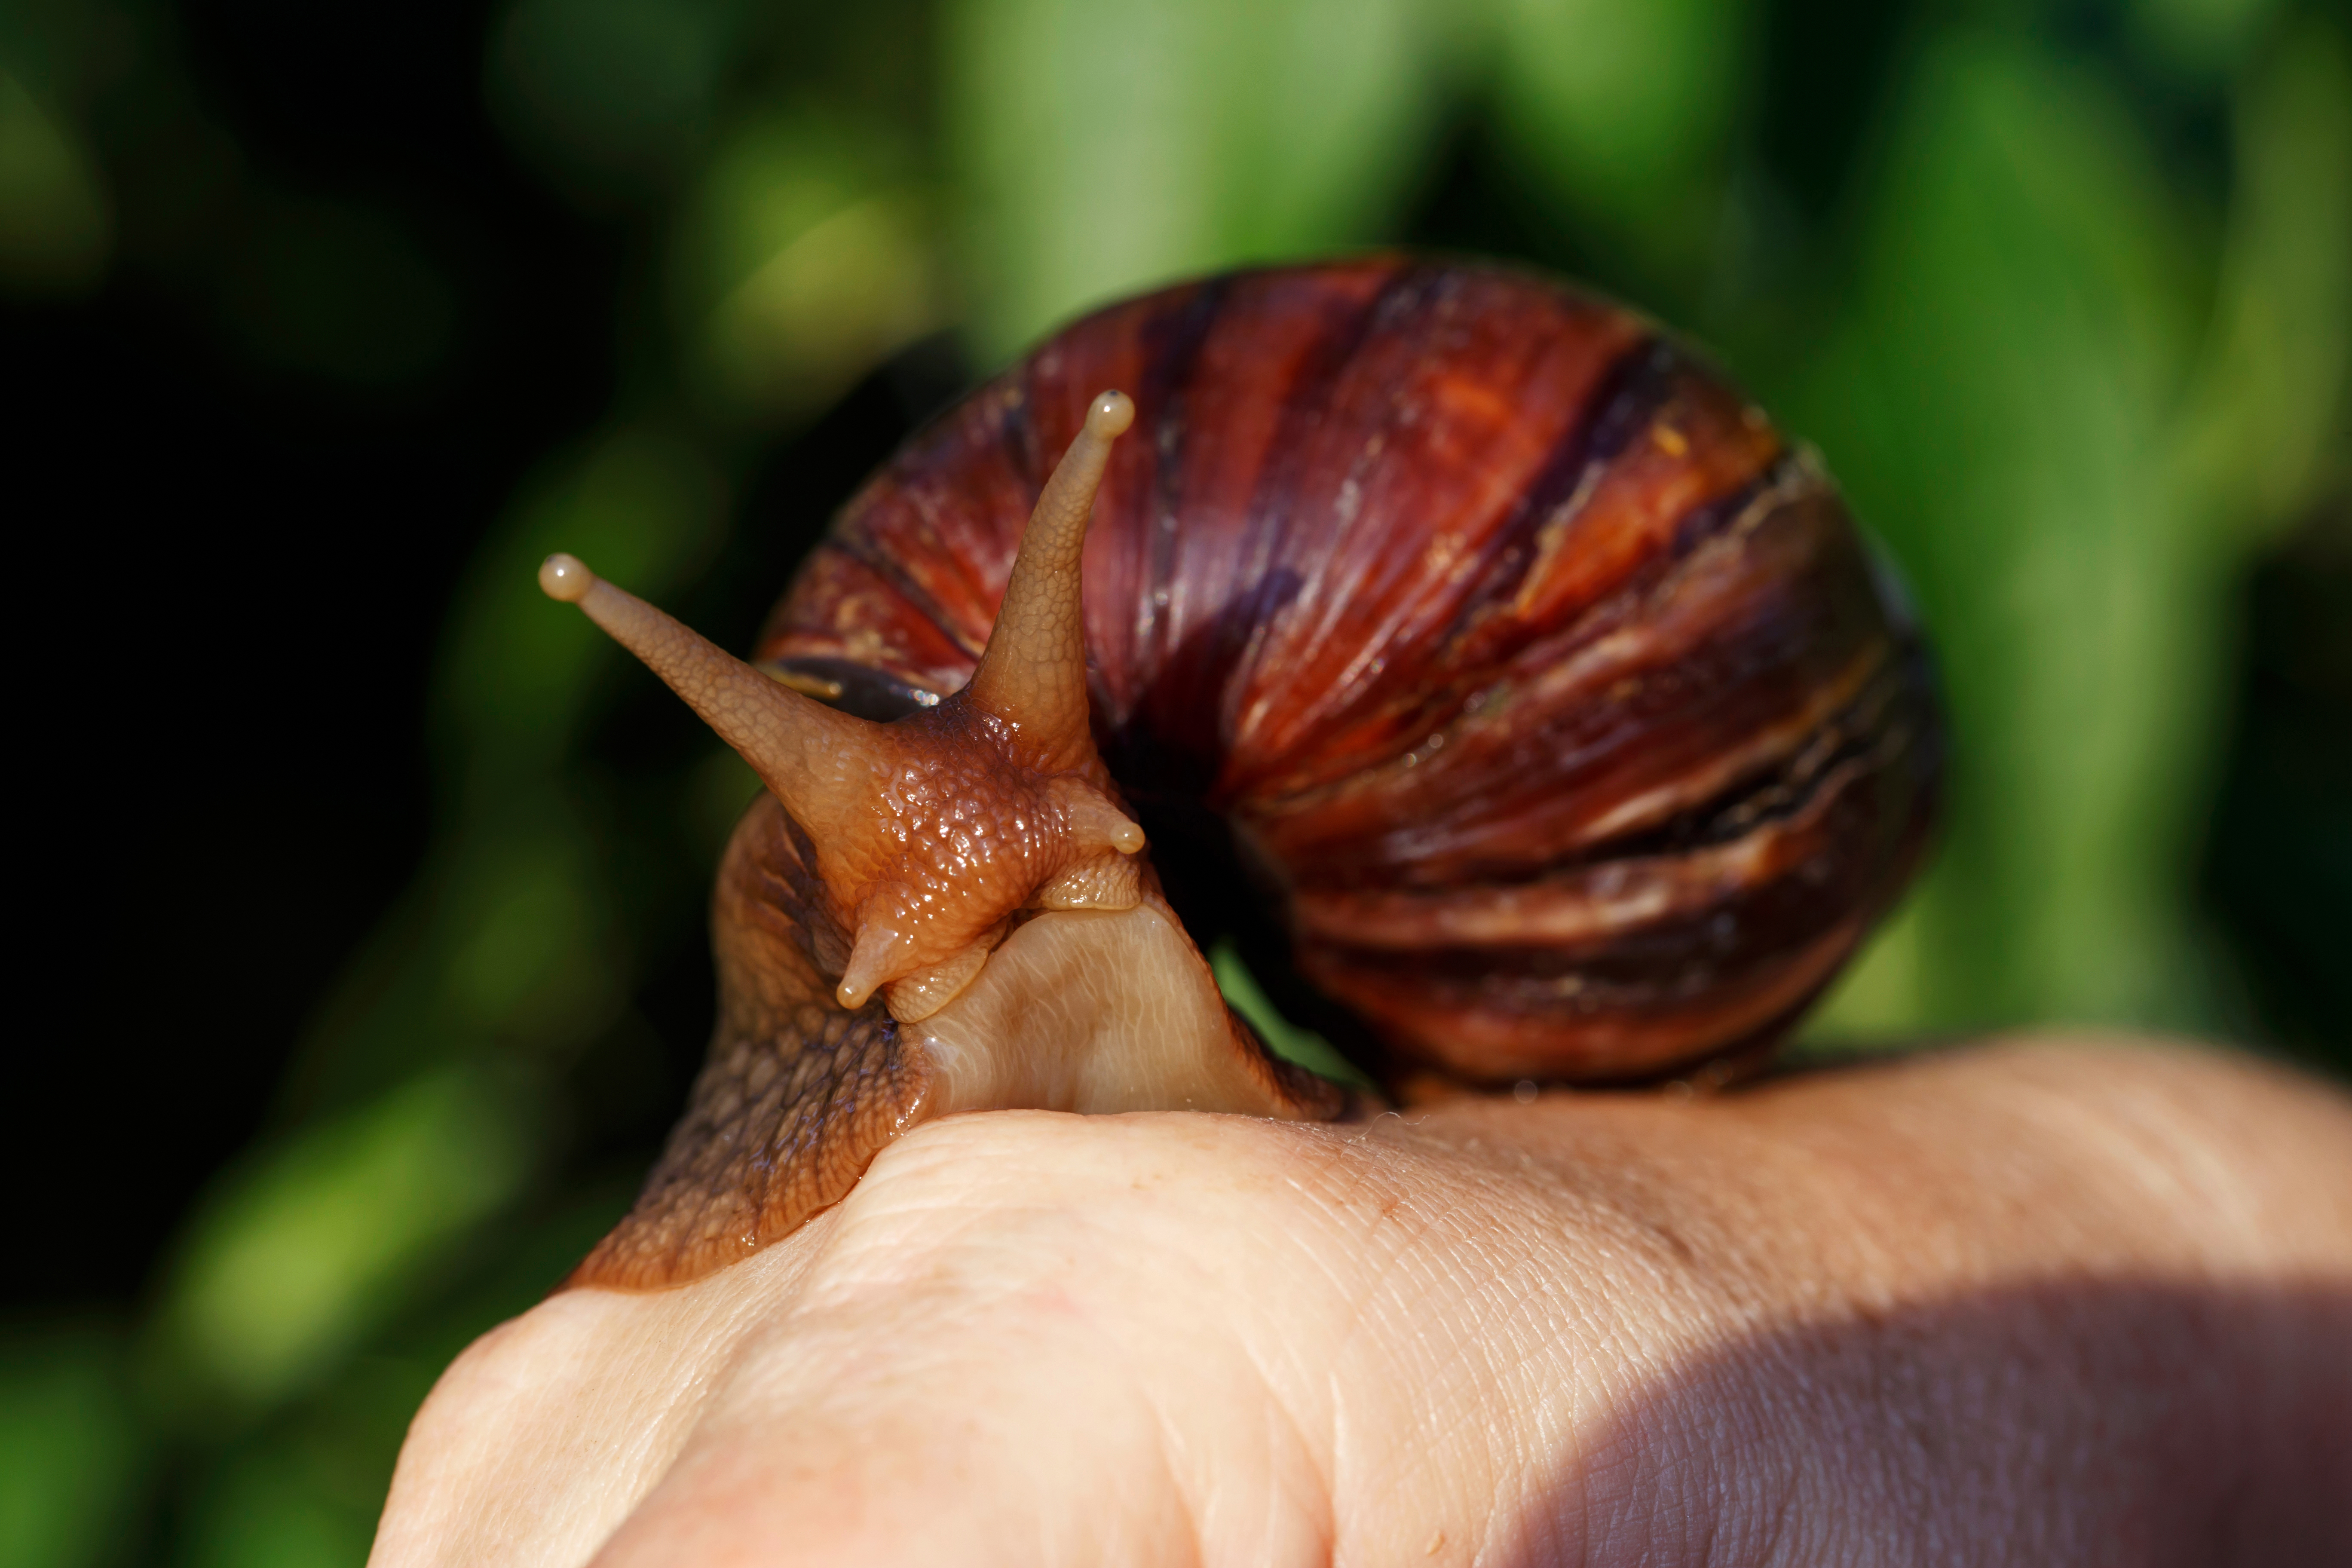 What temperature do giant African land snails live in?